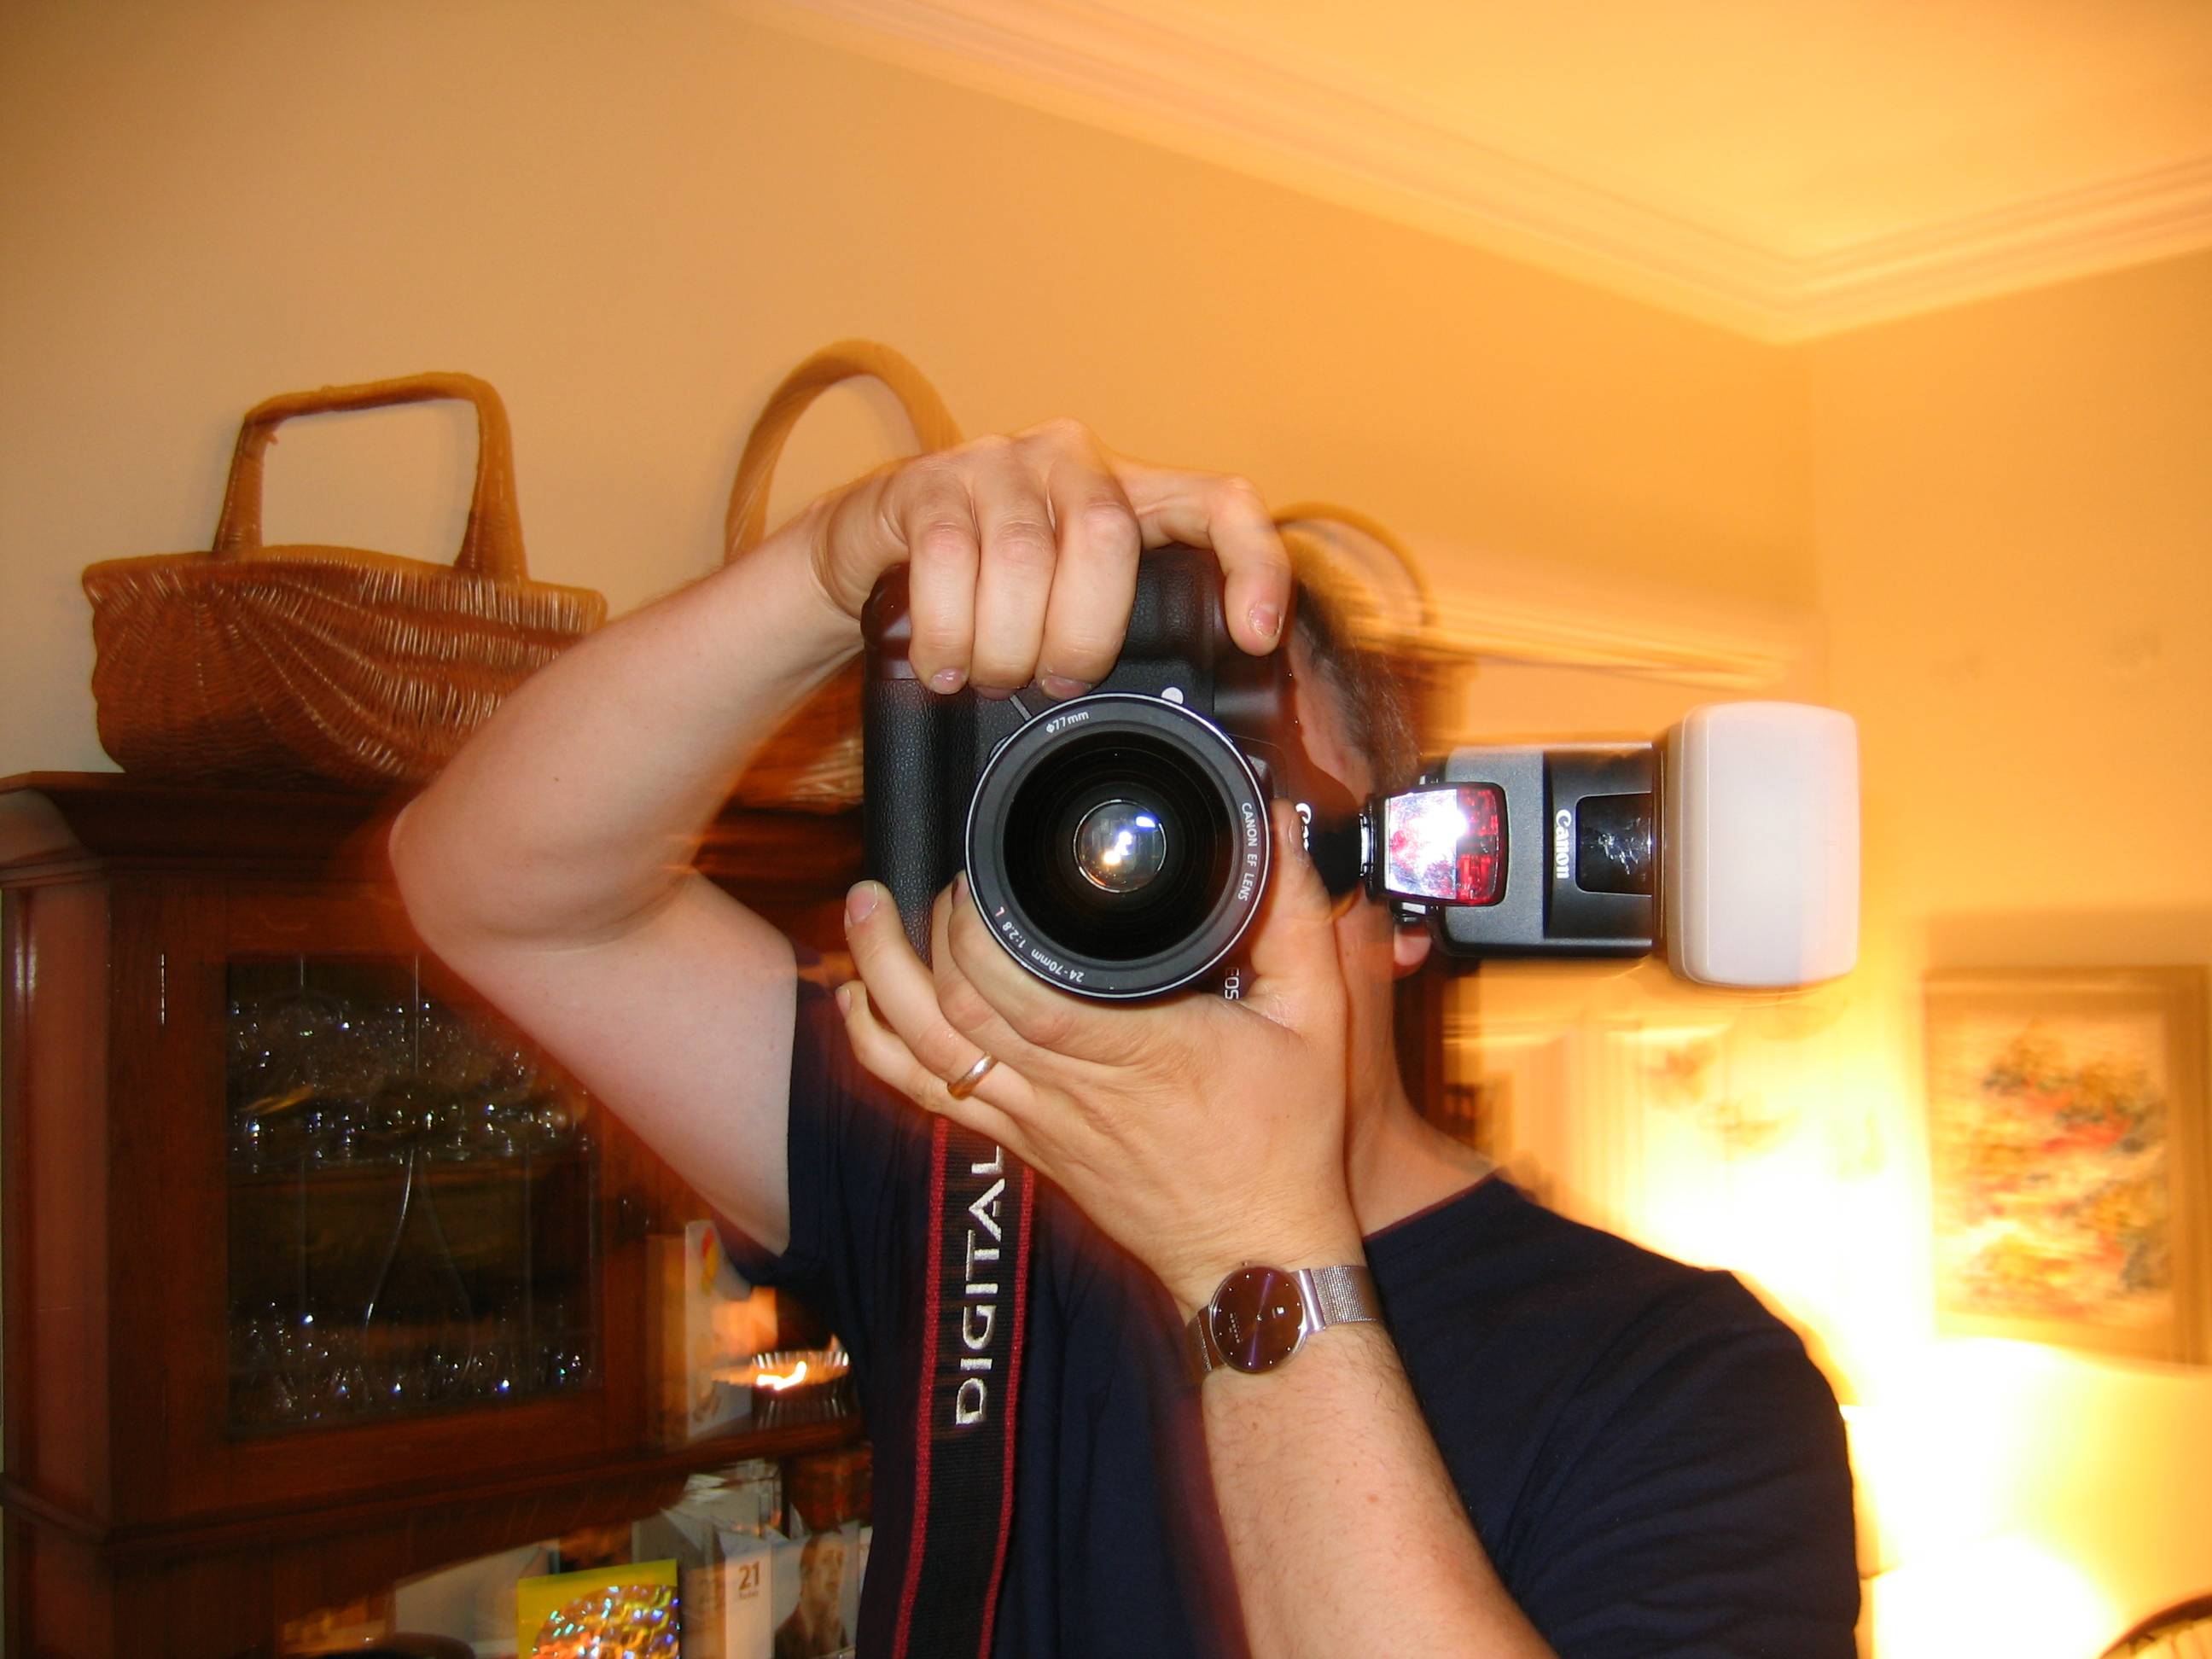 My brother's camera is bigger